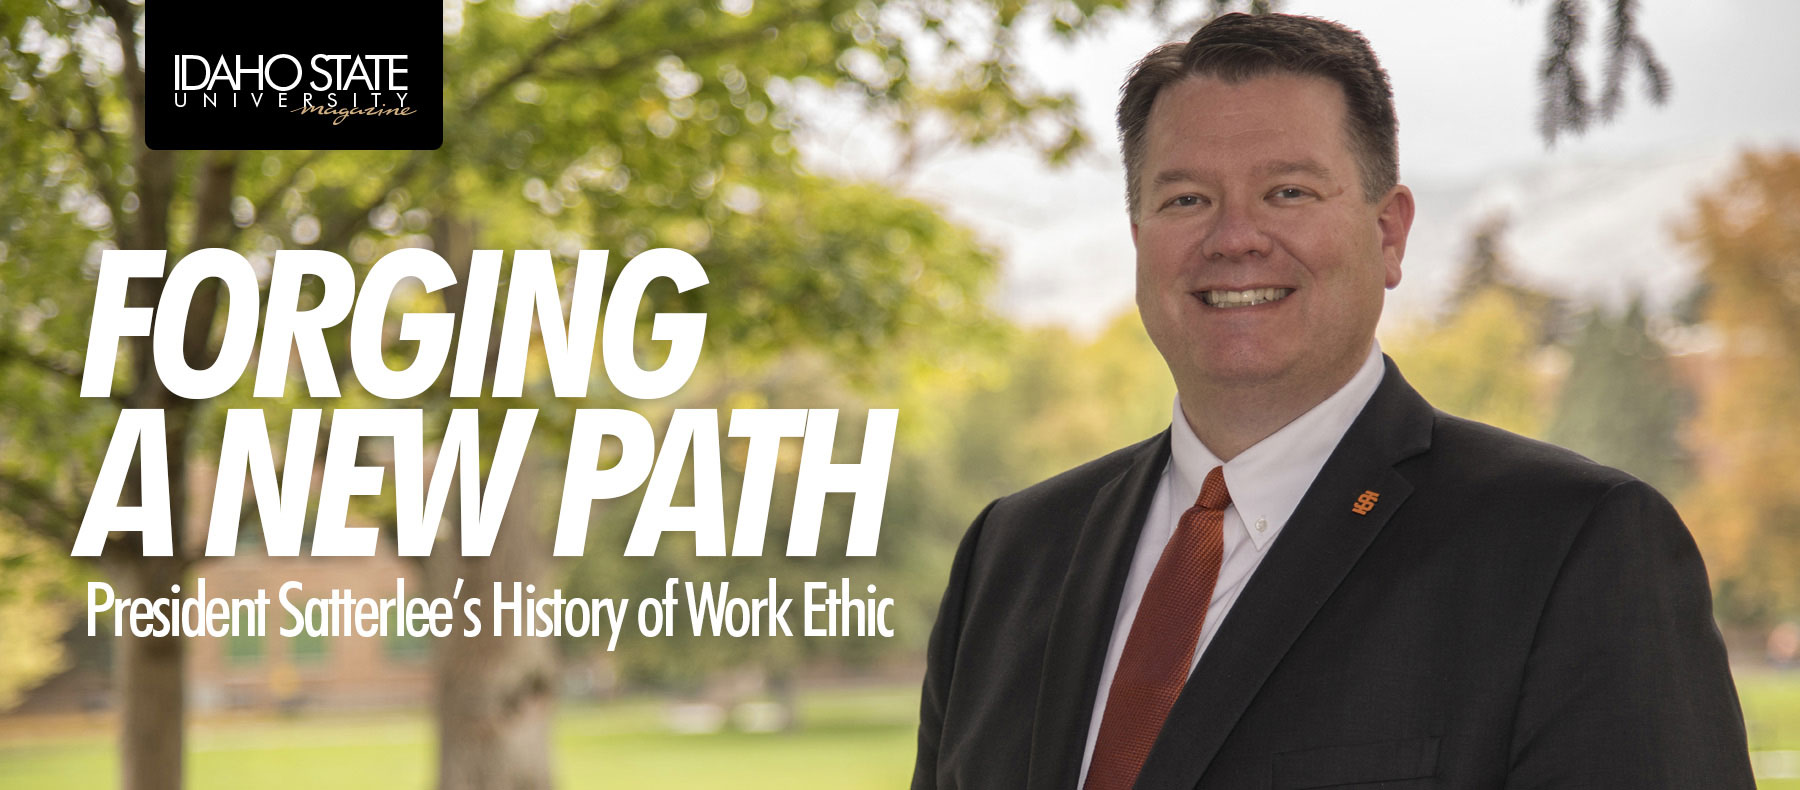 Forging a new path. President Saterlee's history of work ethic.